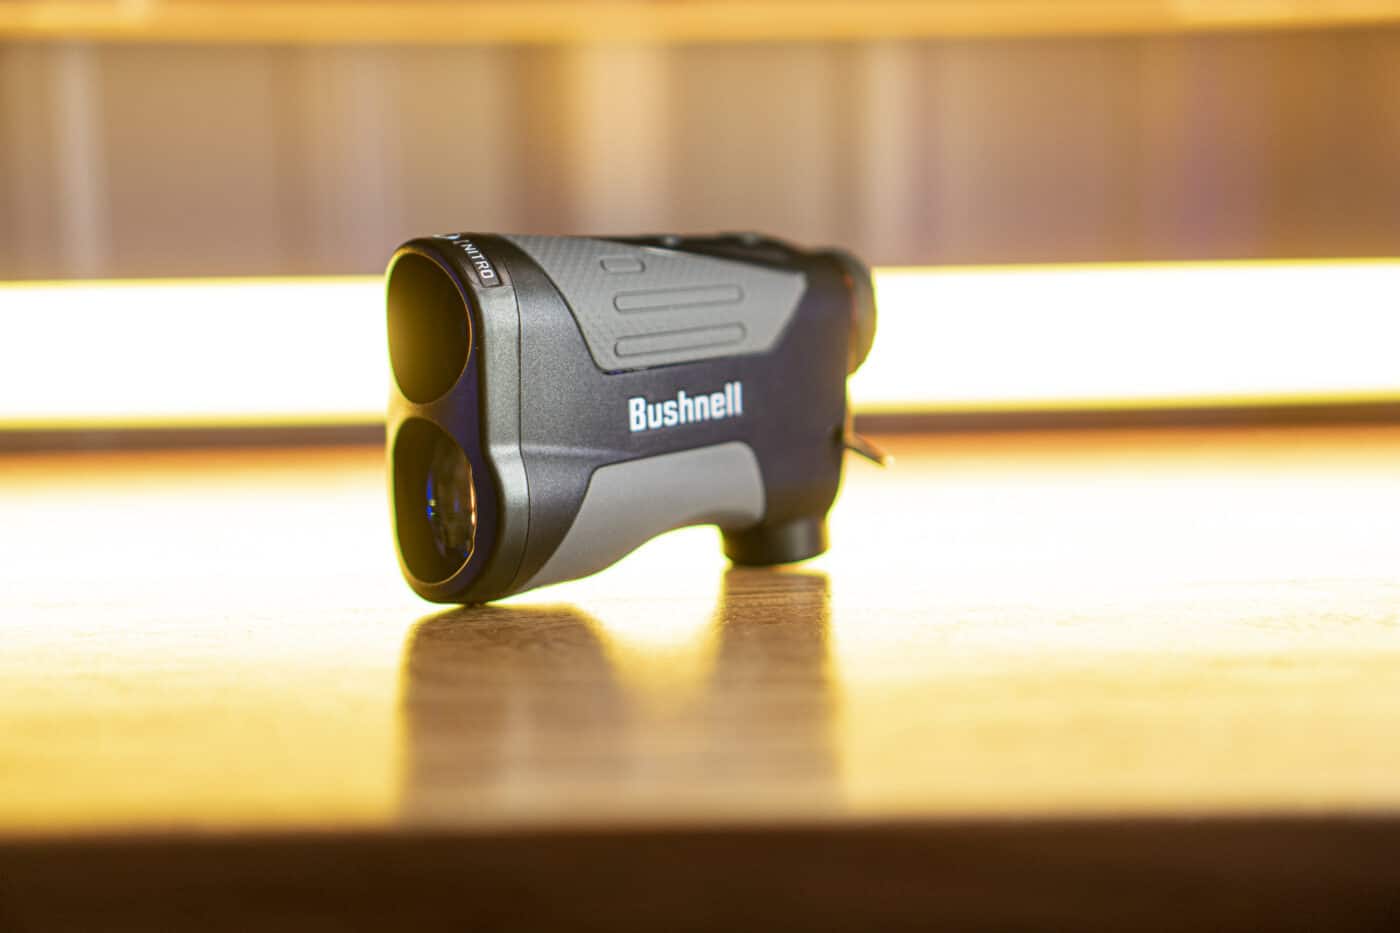 Compact rangefinder by Bushnell